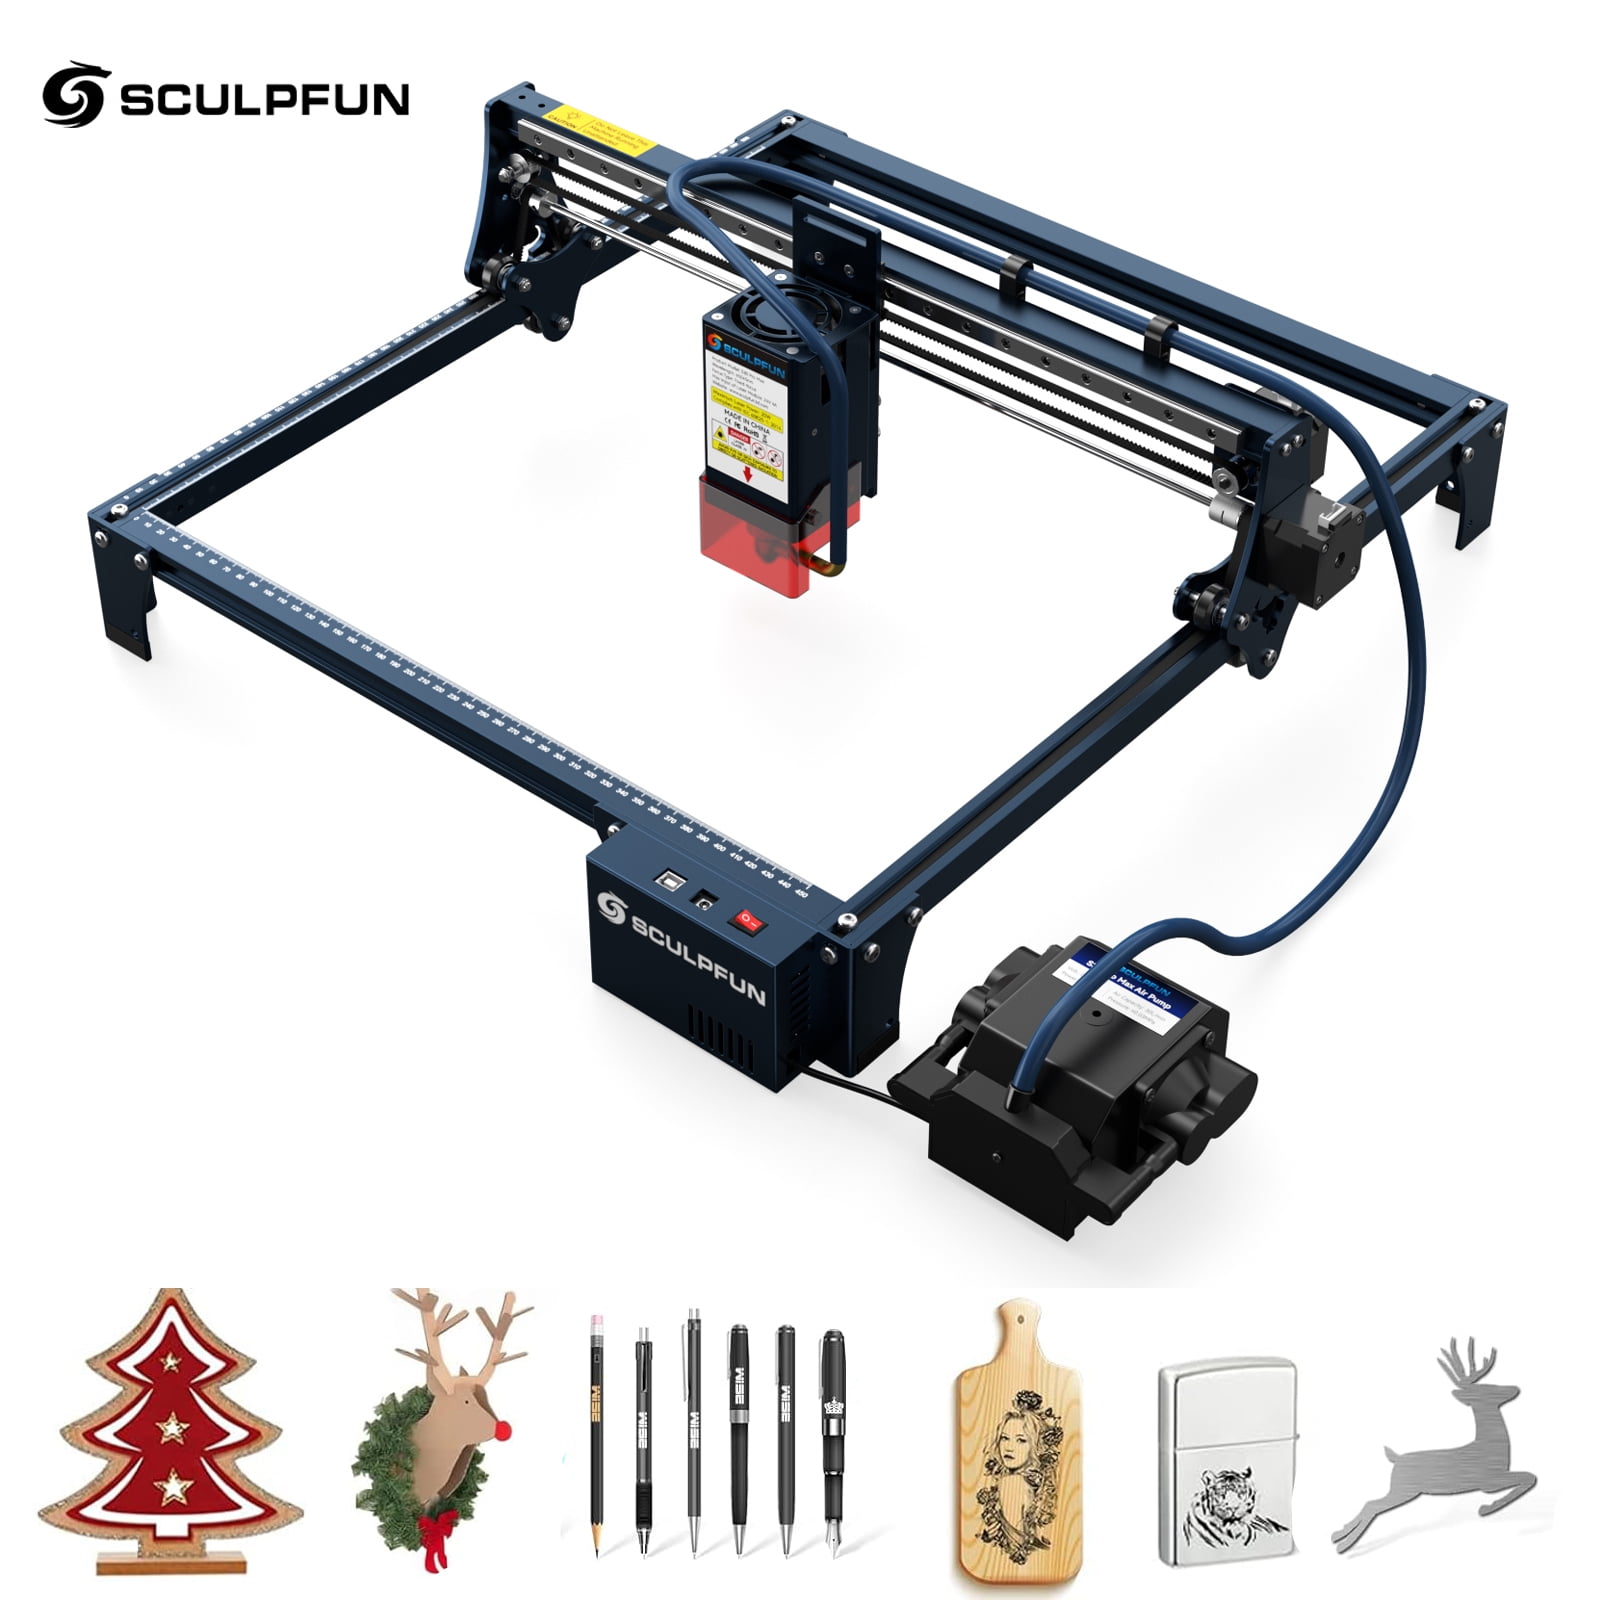 SCULPFUN S30 Pro Max 20W Laser Engraver Automatic Air-assist System Laser  Engraving Machine With Rotary Roller And Honeycomb - Buy SCULPFUN S30 Pro  Max 20W Laser Engraver Automatic Air-assist System Laser Engraving